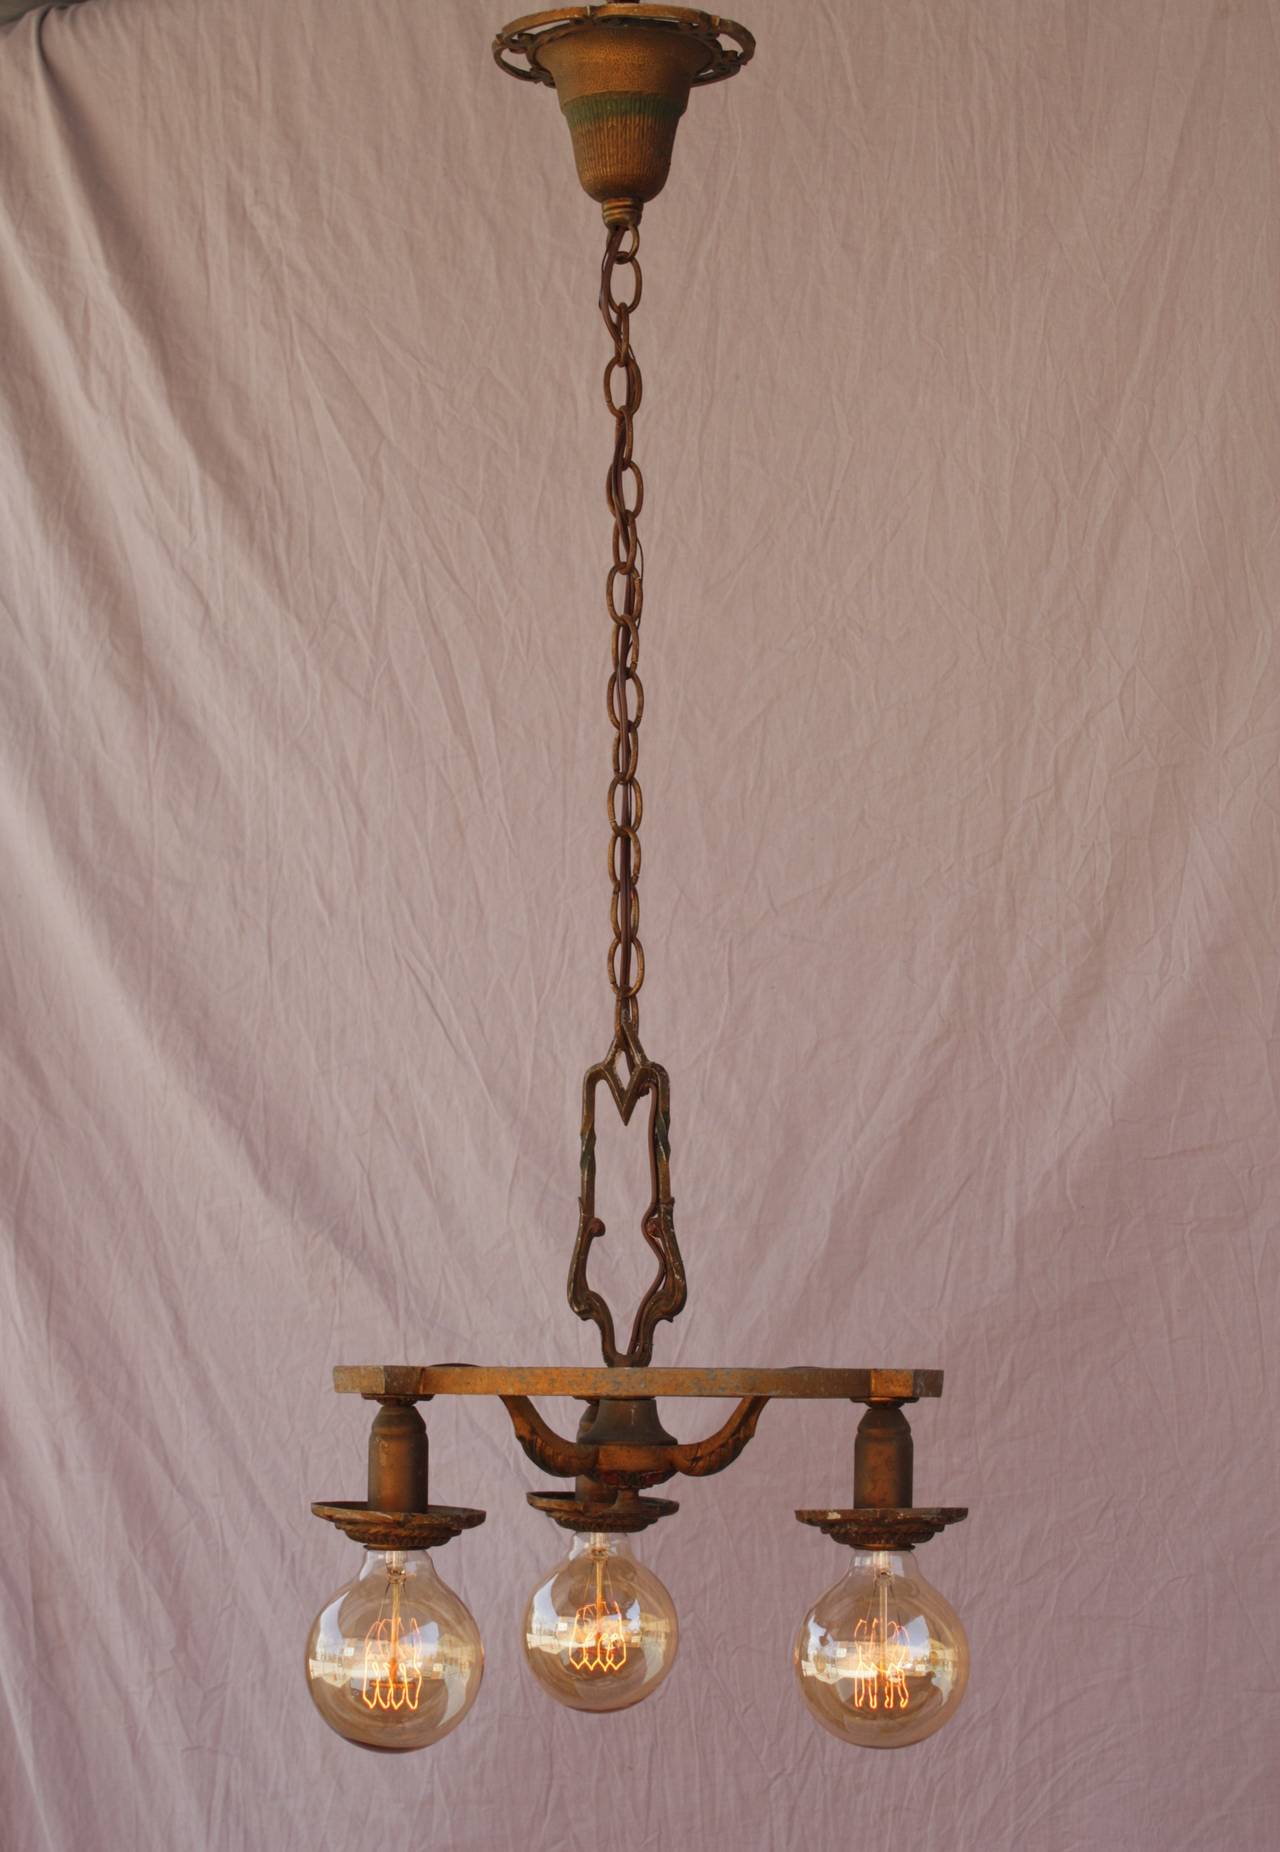 Circa 1920's chandelier with polychrome finish. Body of fixture is 14.5